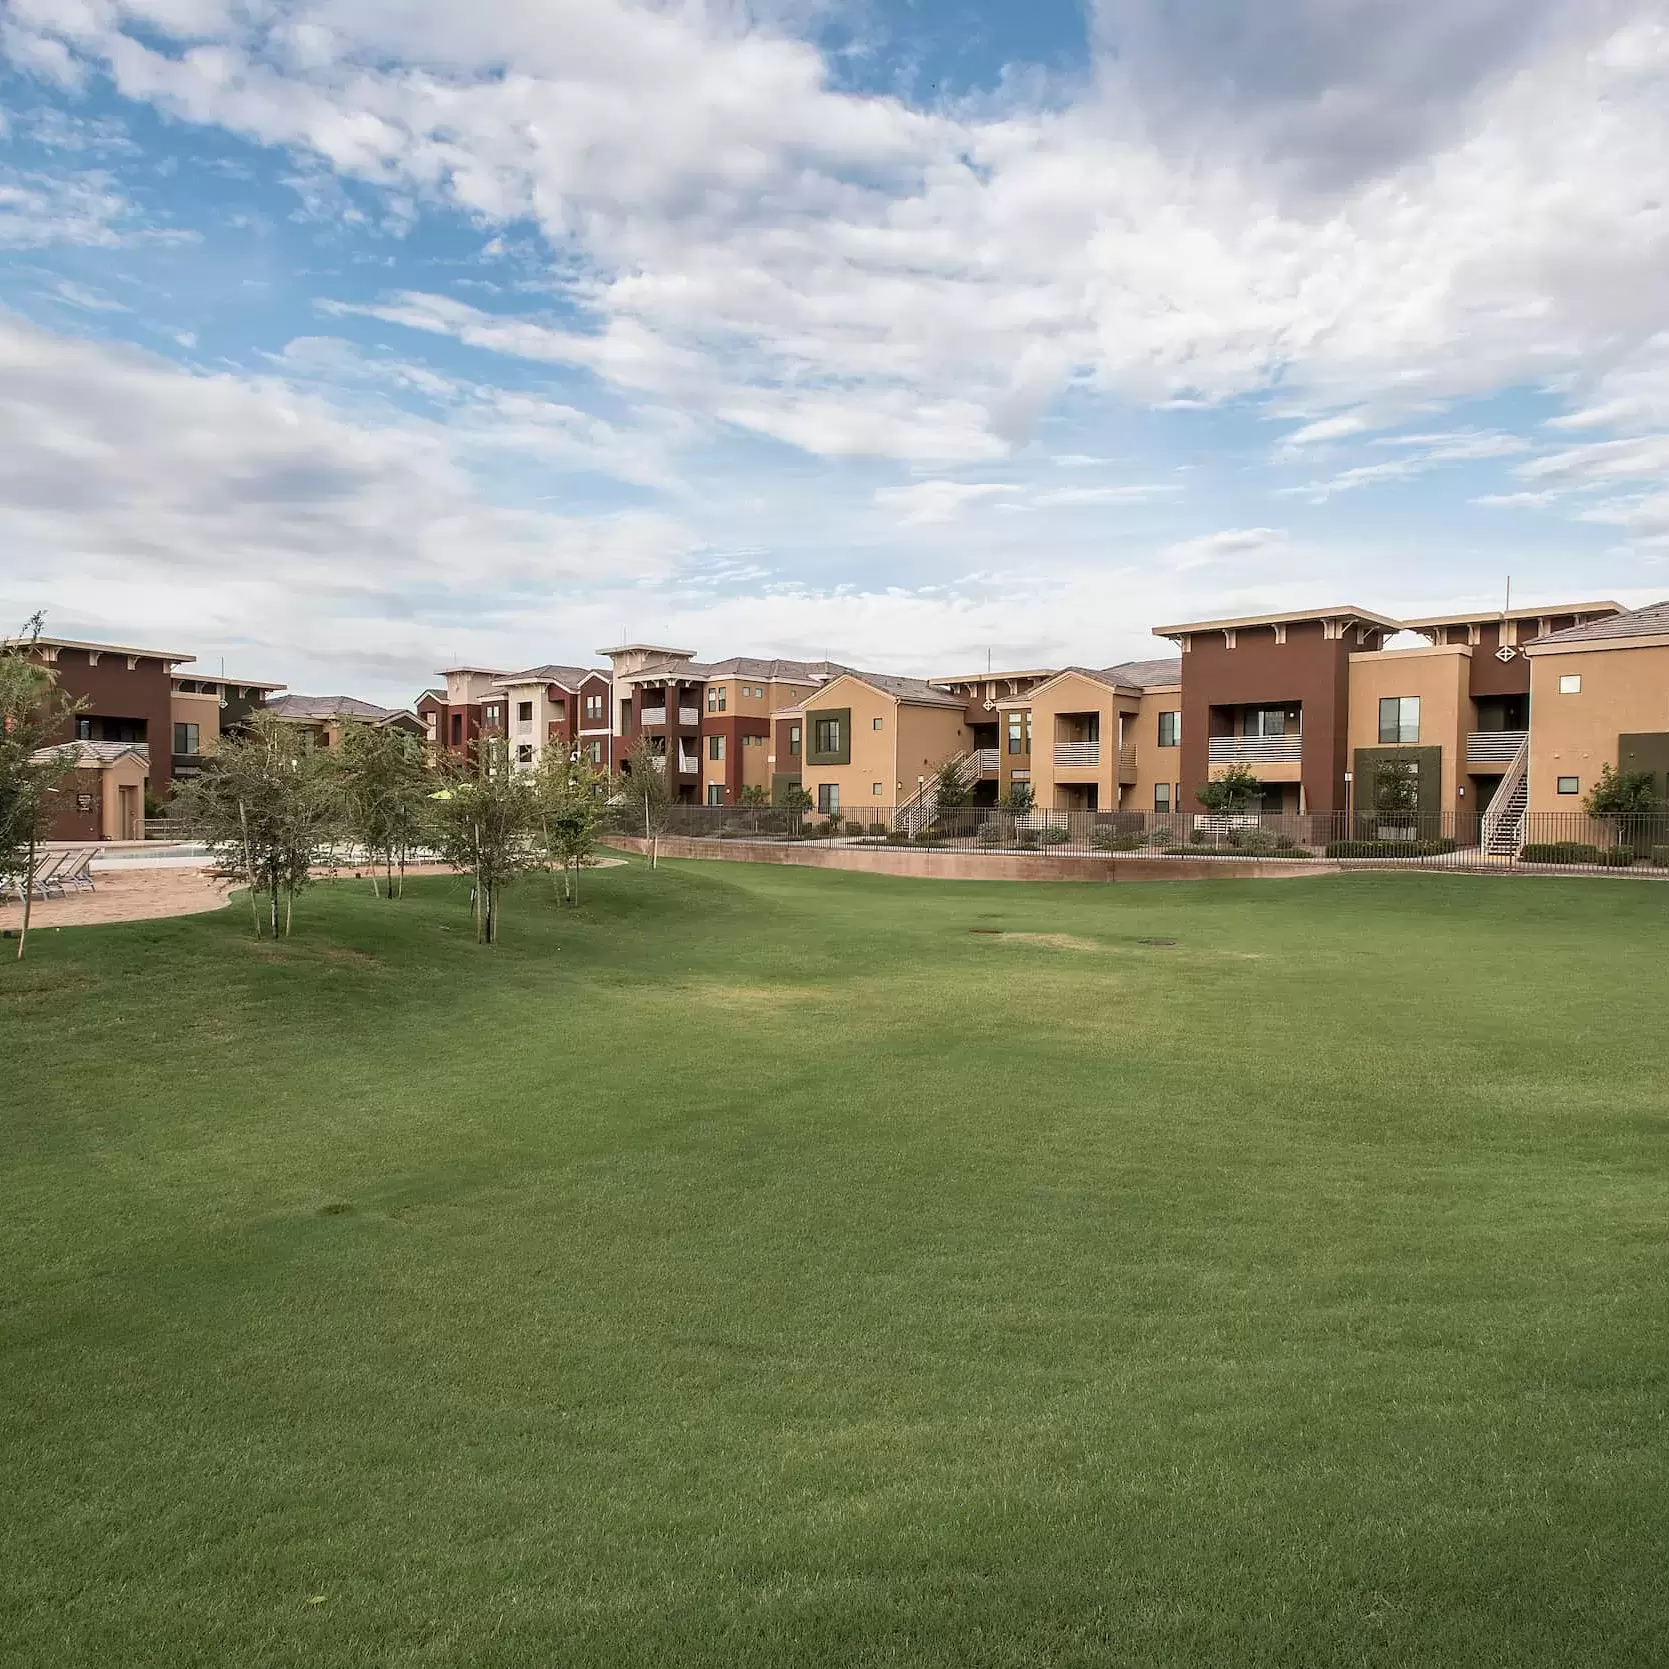 A large grassy field providing a peaceful view at the Gilberts, Az apartment complex.